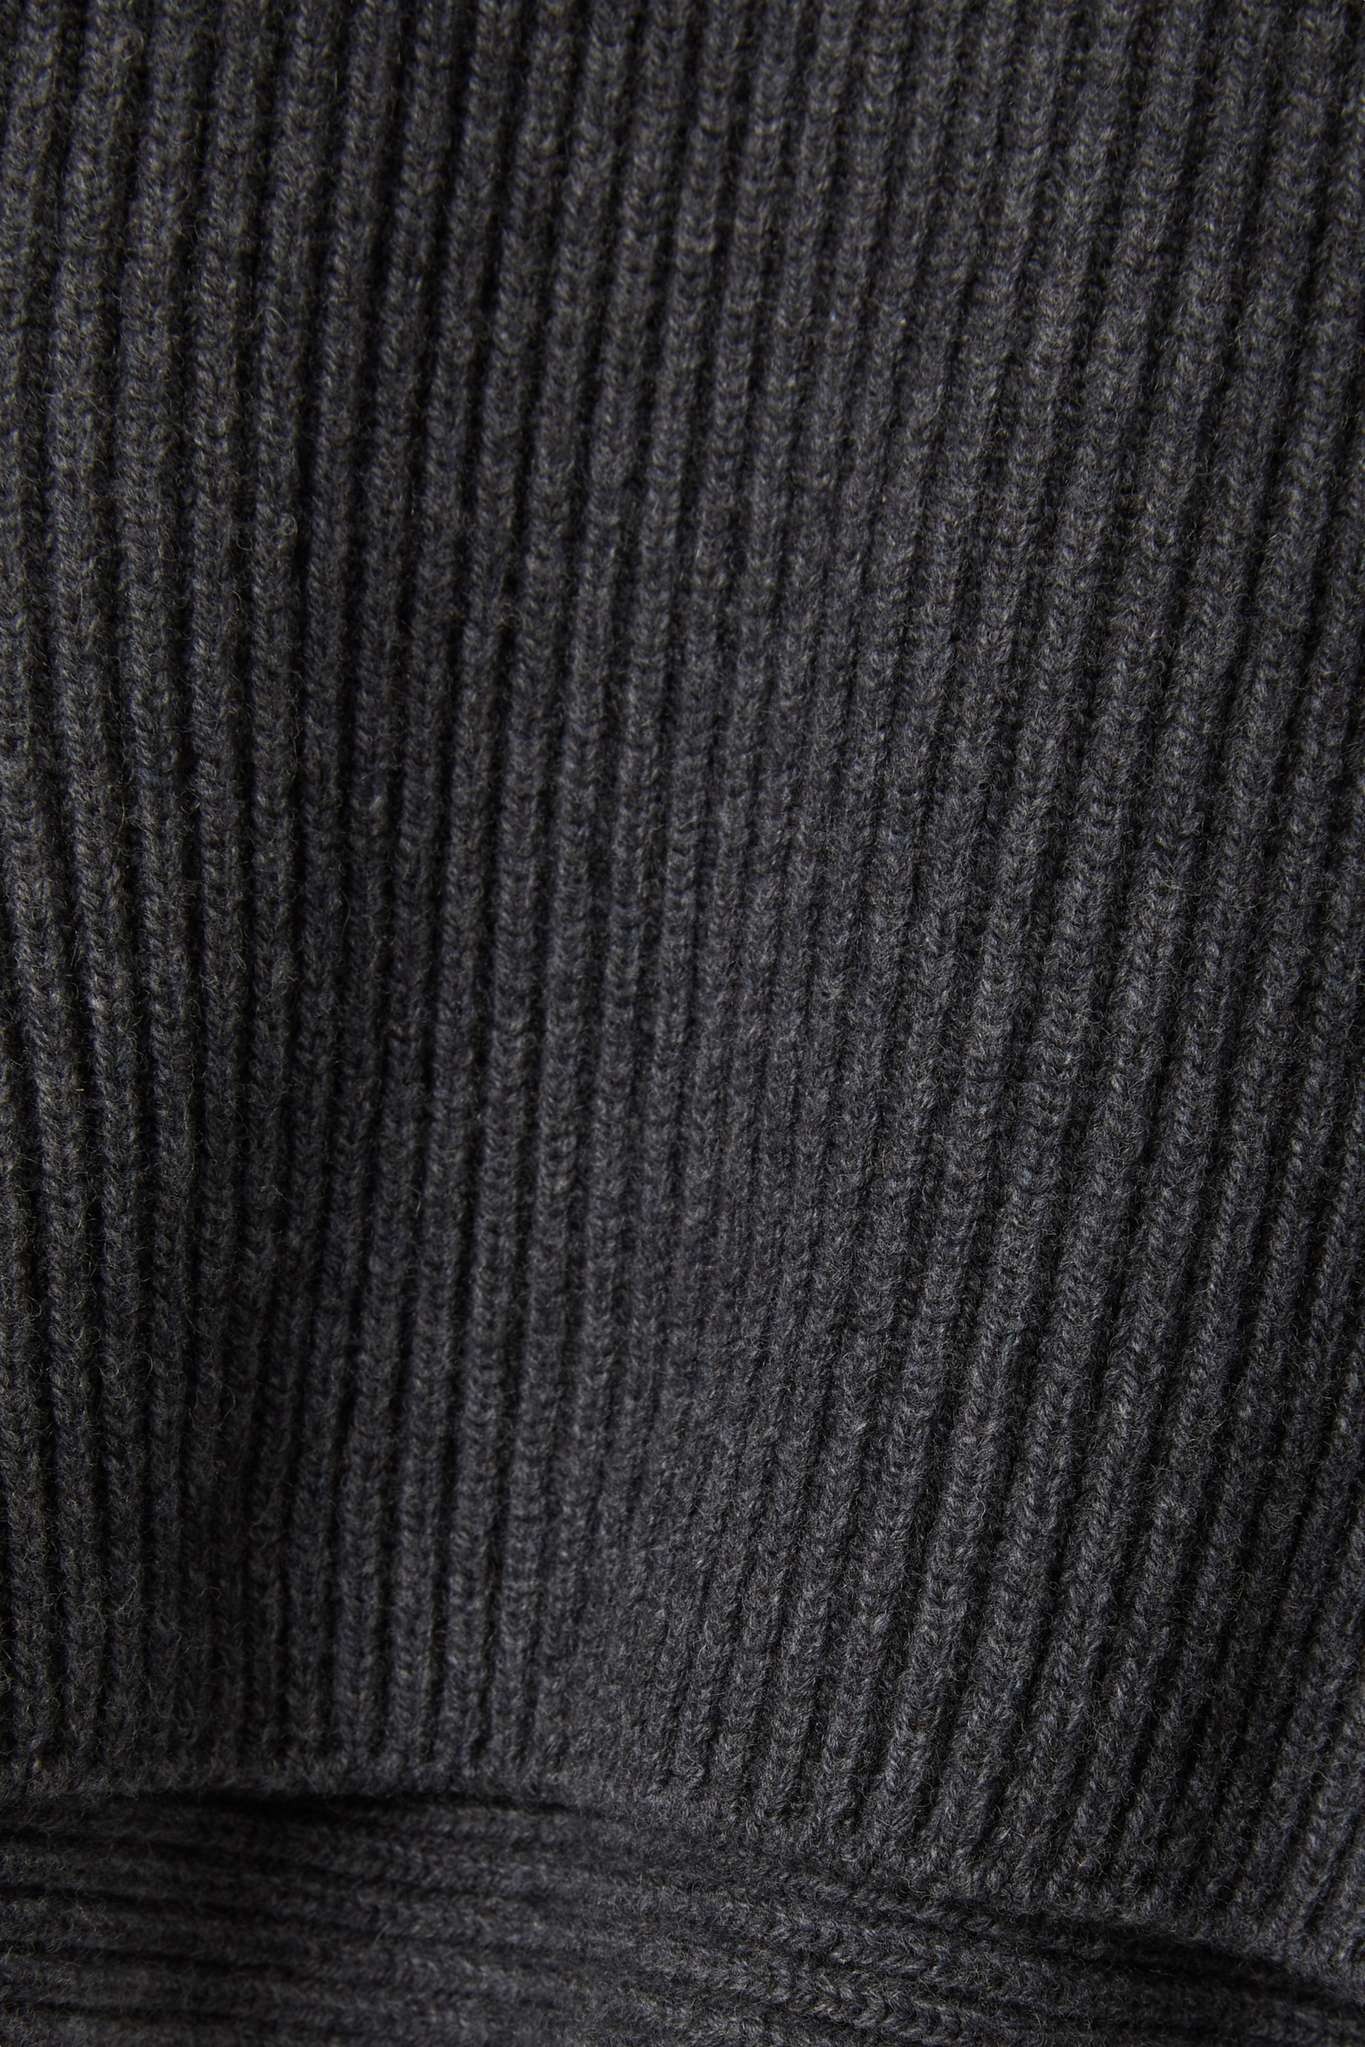 Ribbed wool and cashmere-blend sweater - 4